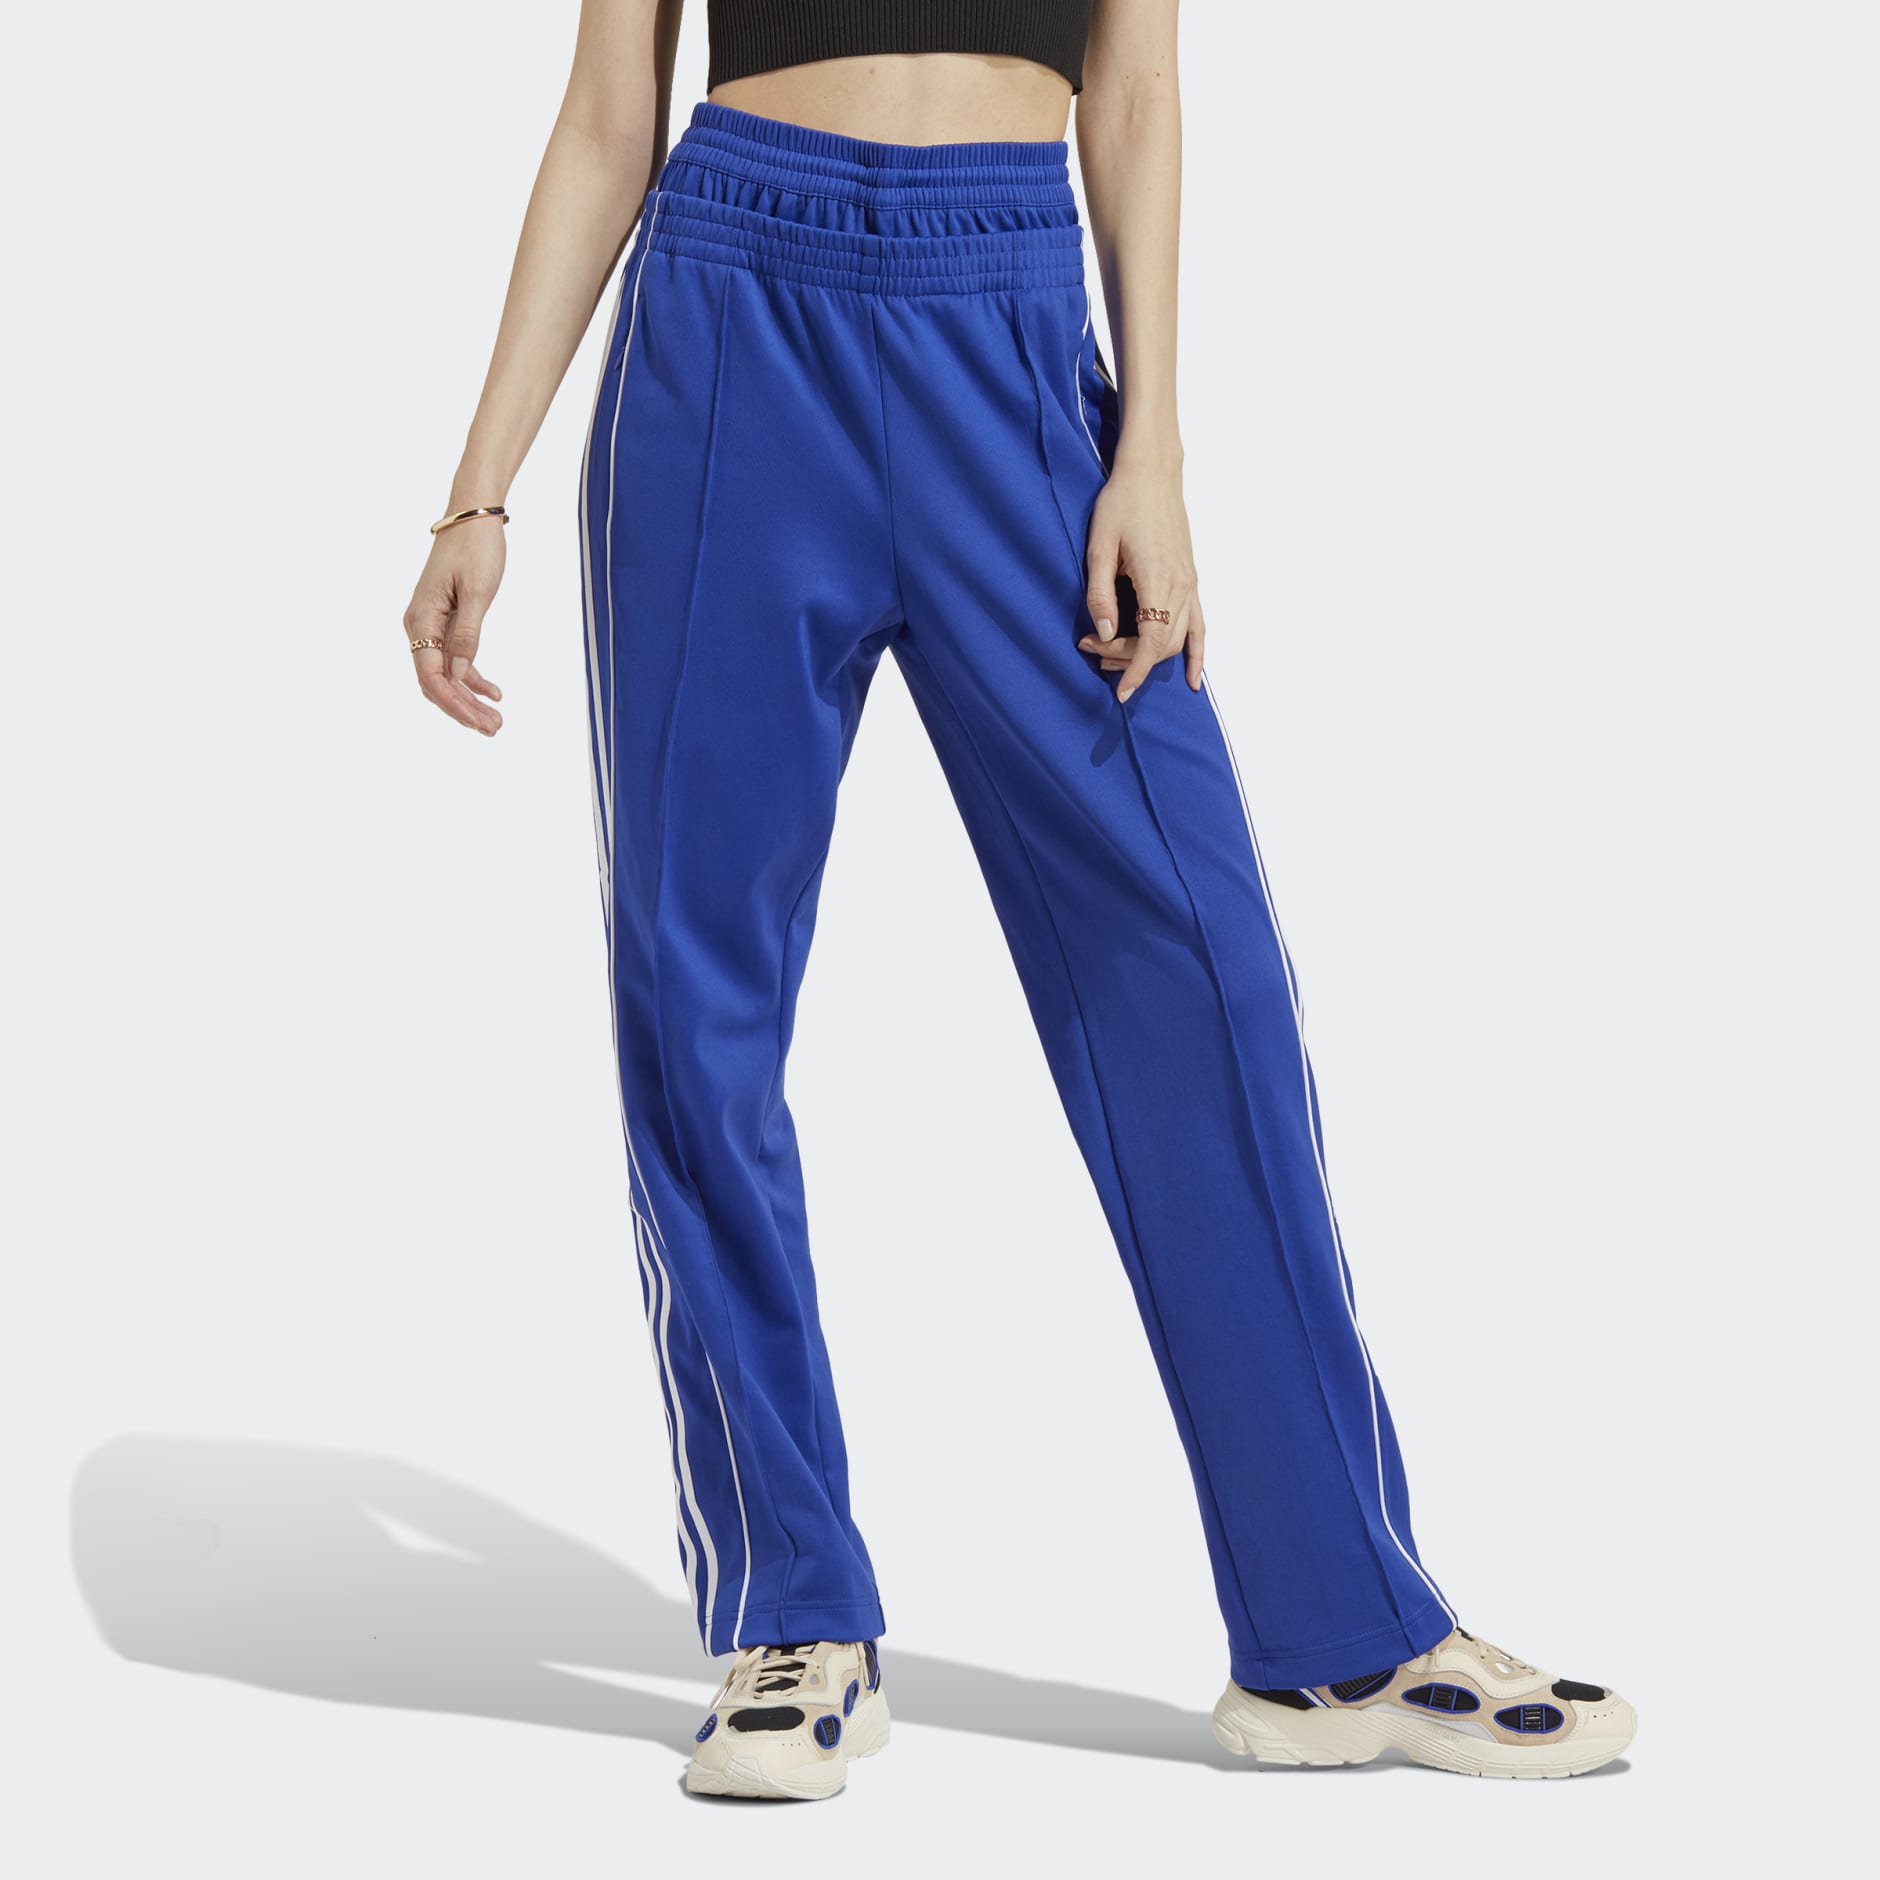 36 Adidas Pants Outfit Ideas: Super Combo Of Comfort And Beauty | Adidas  outfit women, Adidas pants outfit, Adidas track pants outfit